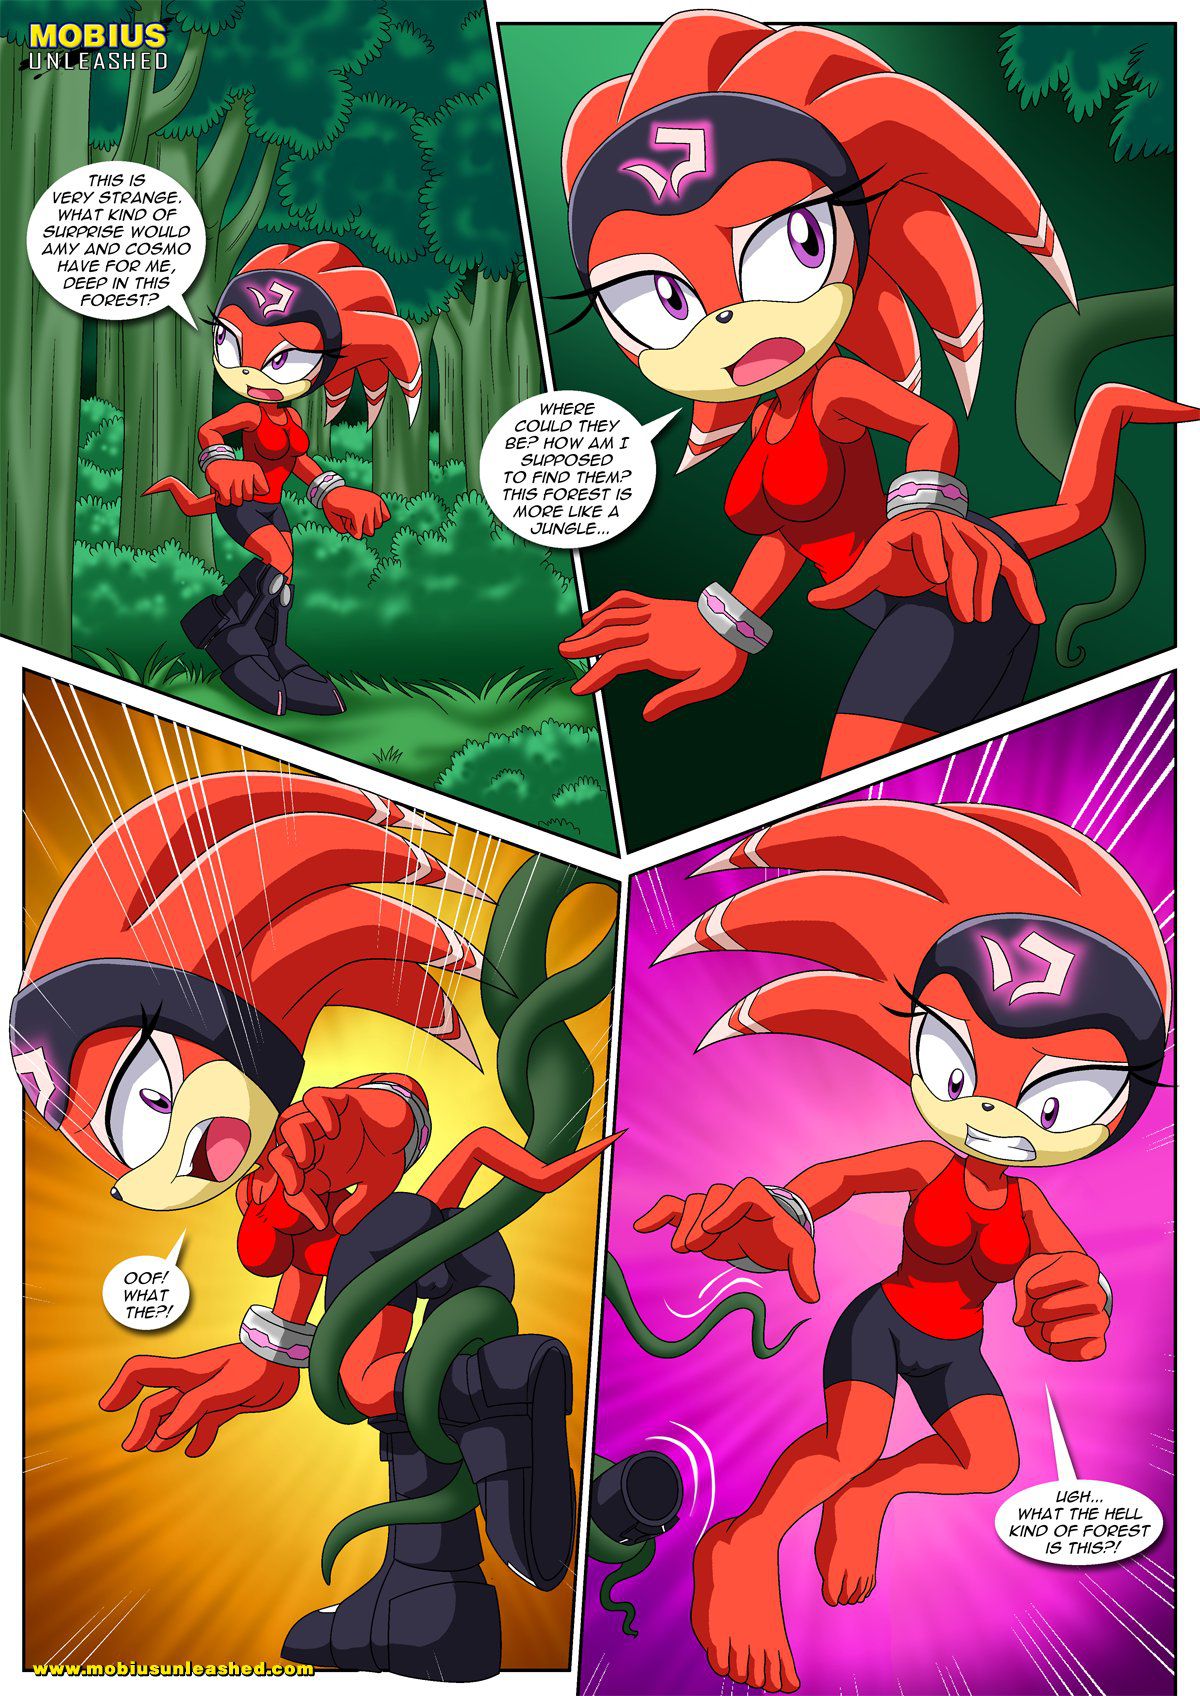 [Palcomix] Team GF's Tentacled Tale (Sonic The Hedgehog) [Ongoing] 7